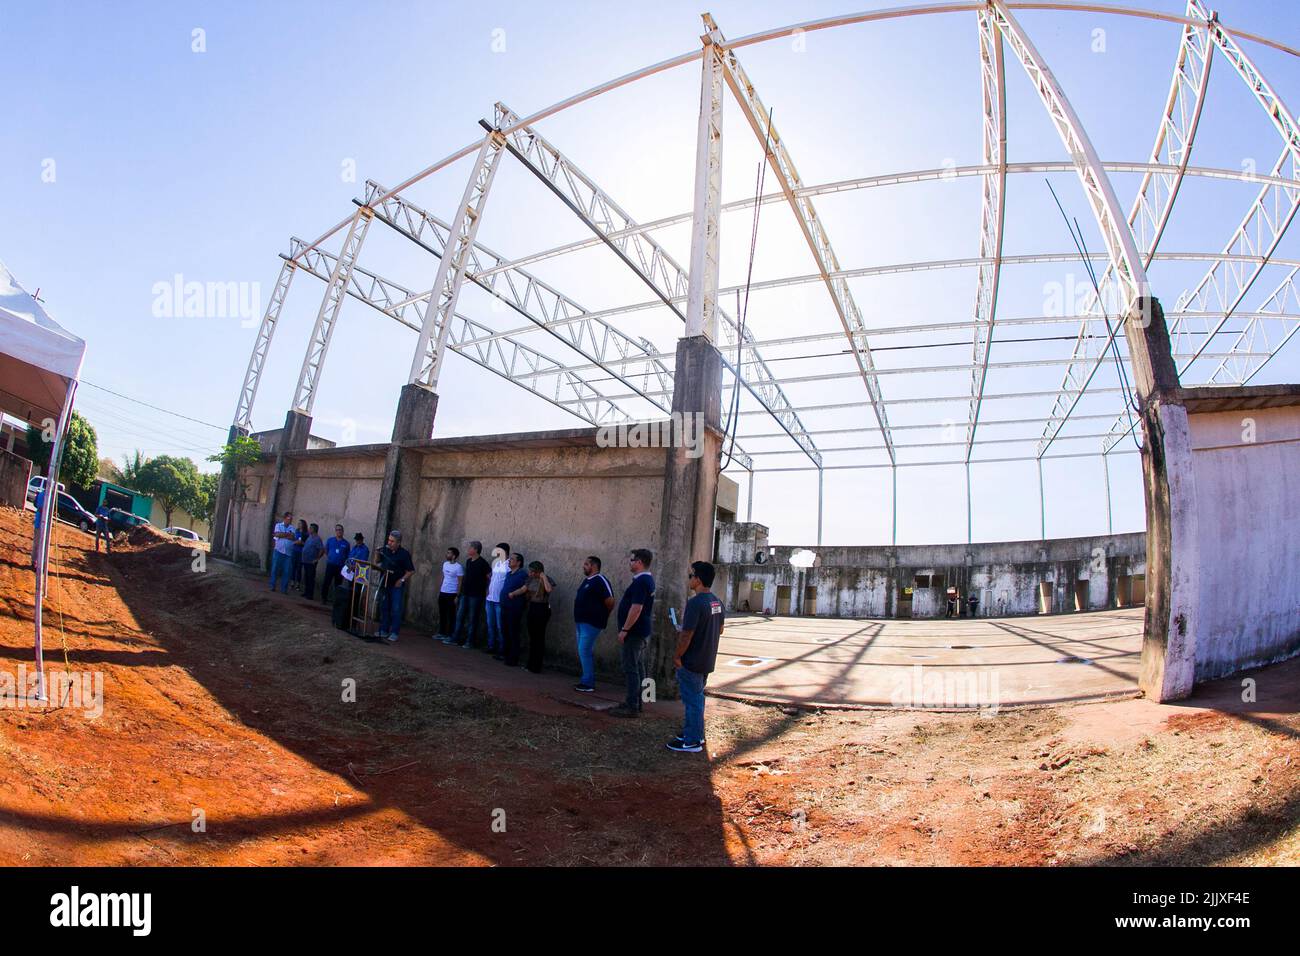 CORUMBÁ, MS - 28.07.2022: PREFEITO ASSINA ORDEM DE SERVIÇO - Mayor Marcelo Iunes released this Thursday morning, (28), the order of service for the completion of the Sports Initiation Center (CIE) located in the Guanã neighborhood, upper part of Corumbá. The work began in 2015 and, at the time, was budgeted at R$ 3.5 million, 90% of which came from federal funds, through the second stage of PAC 2, and 10% from the Municipality. (Photo: Clóvis Neto/Fotoarena) Stock Photo